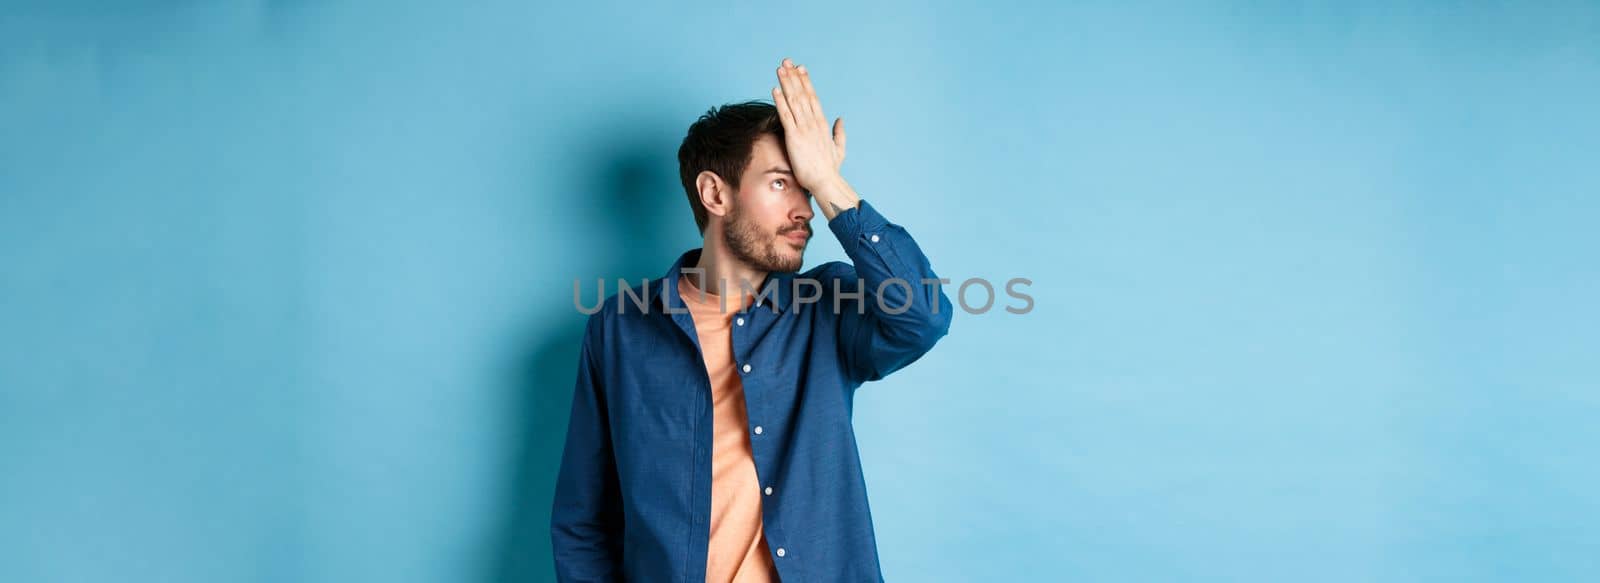 Annoyed and tired man facepalm, roll eyes and look bothered by stupid behaviour, standing on blue background.